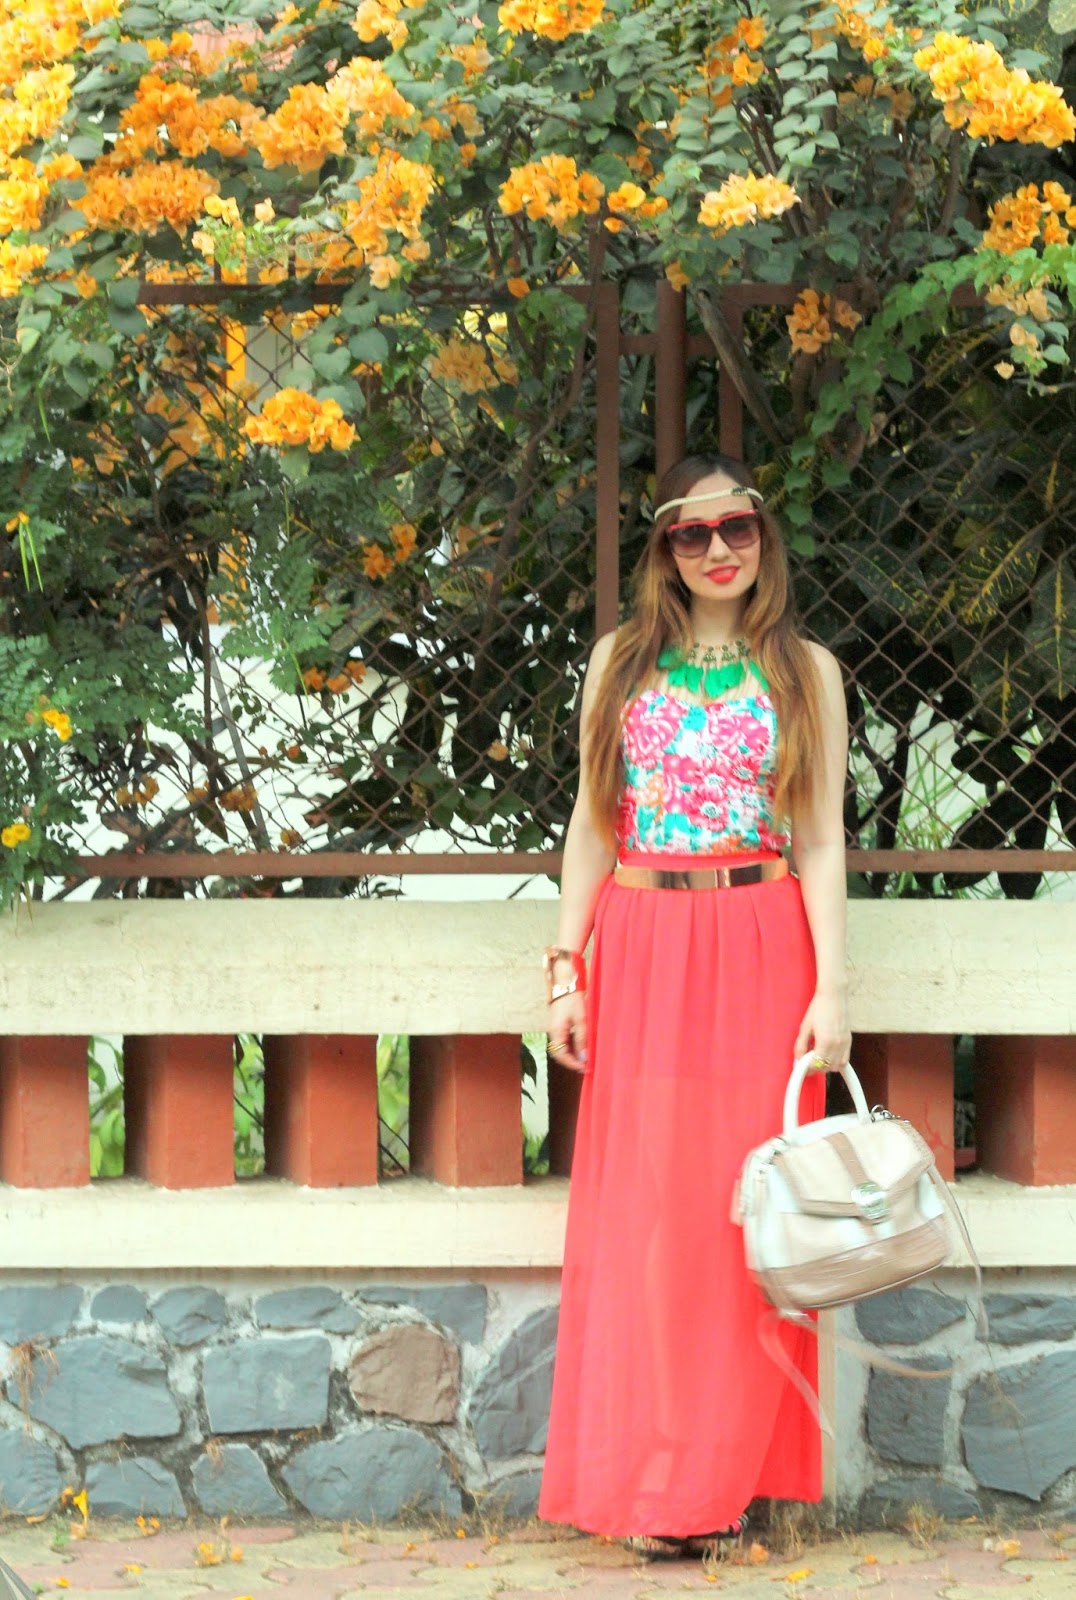 Boho-Chic OOTD - Floral Top & Maxi Skirt